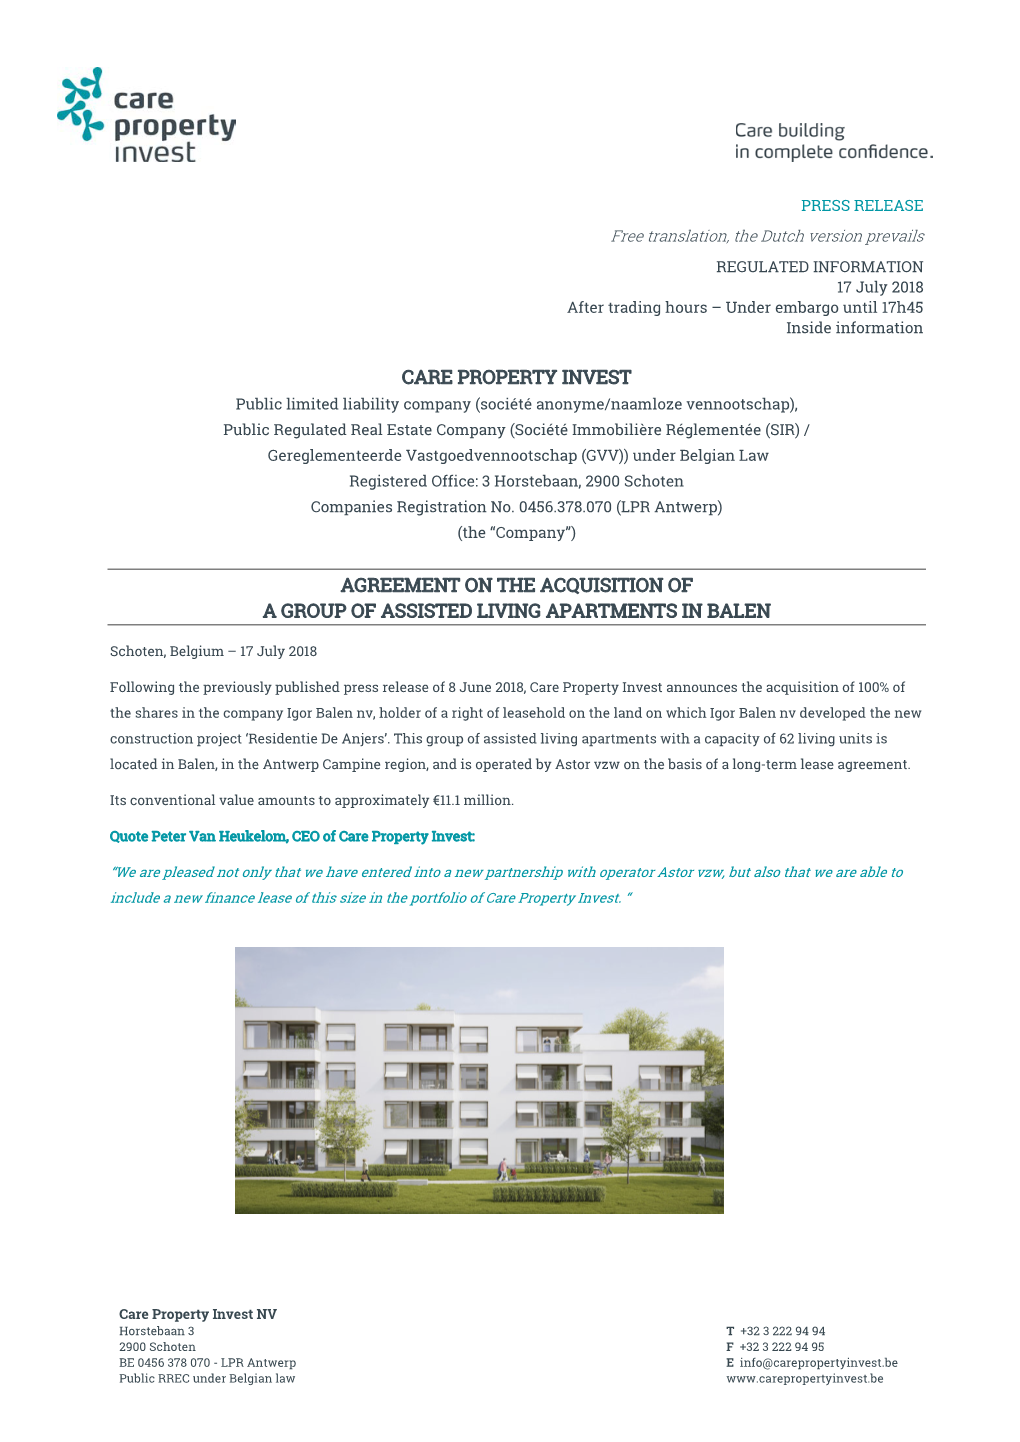 Care Property Invest Agreement on The